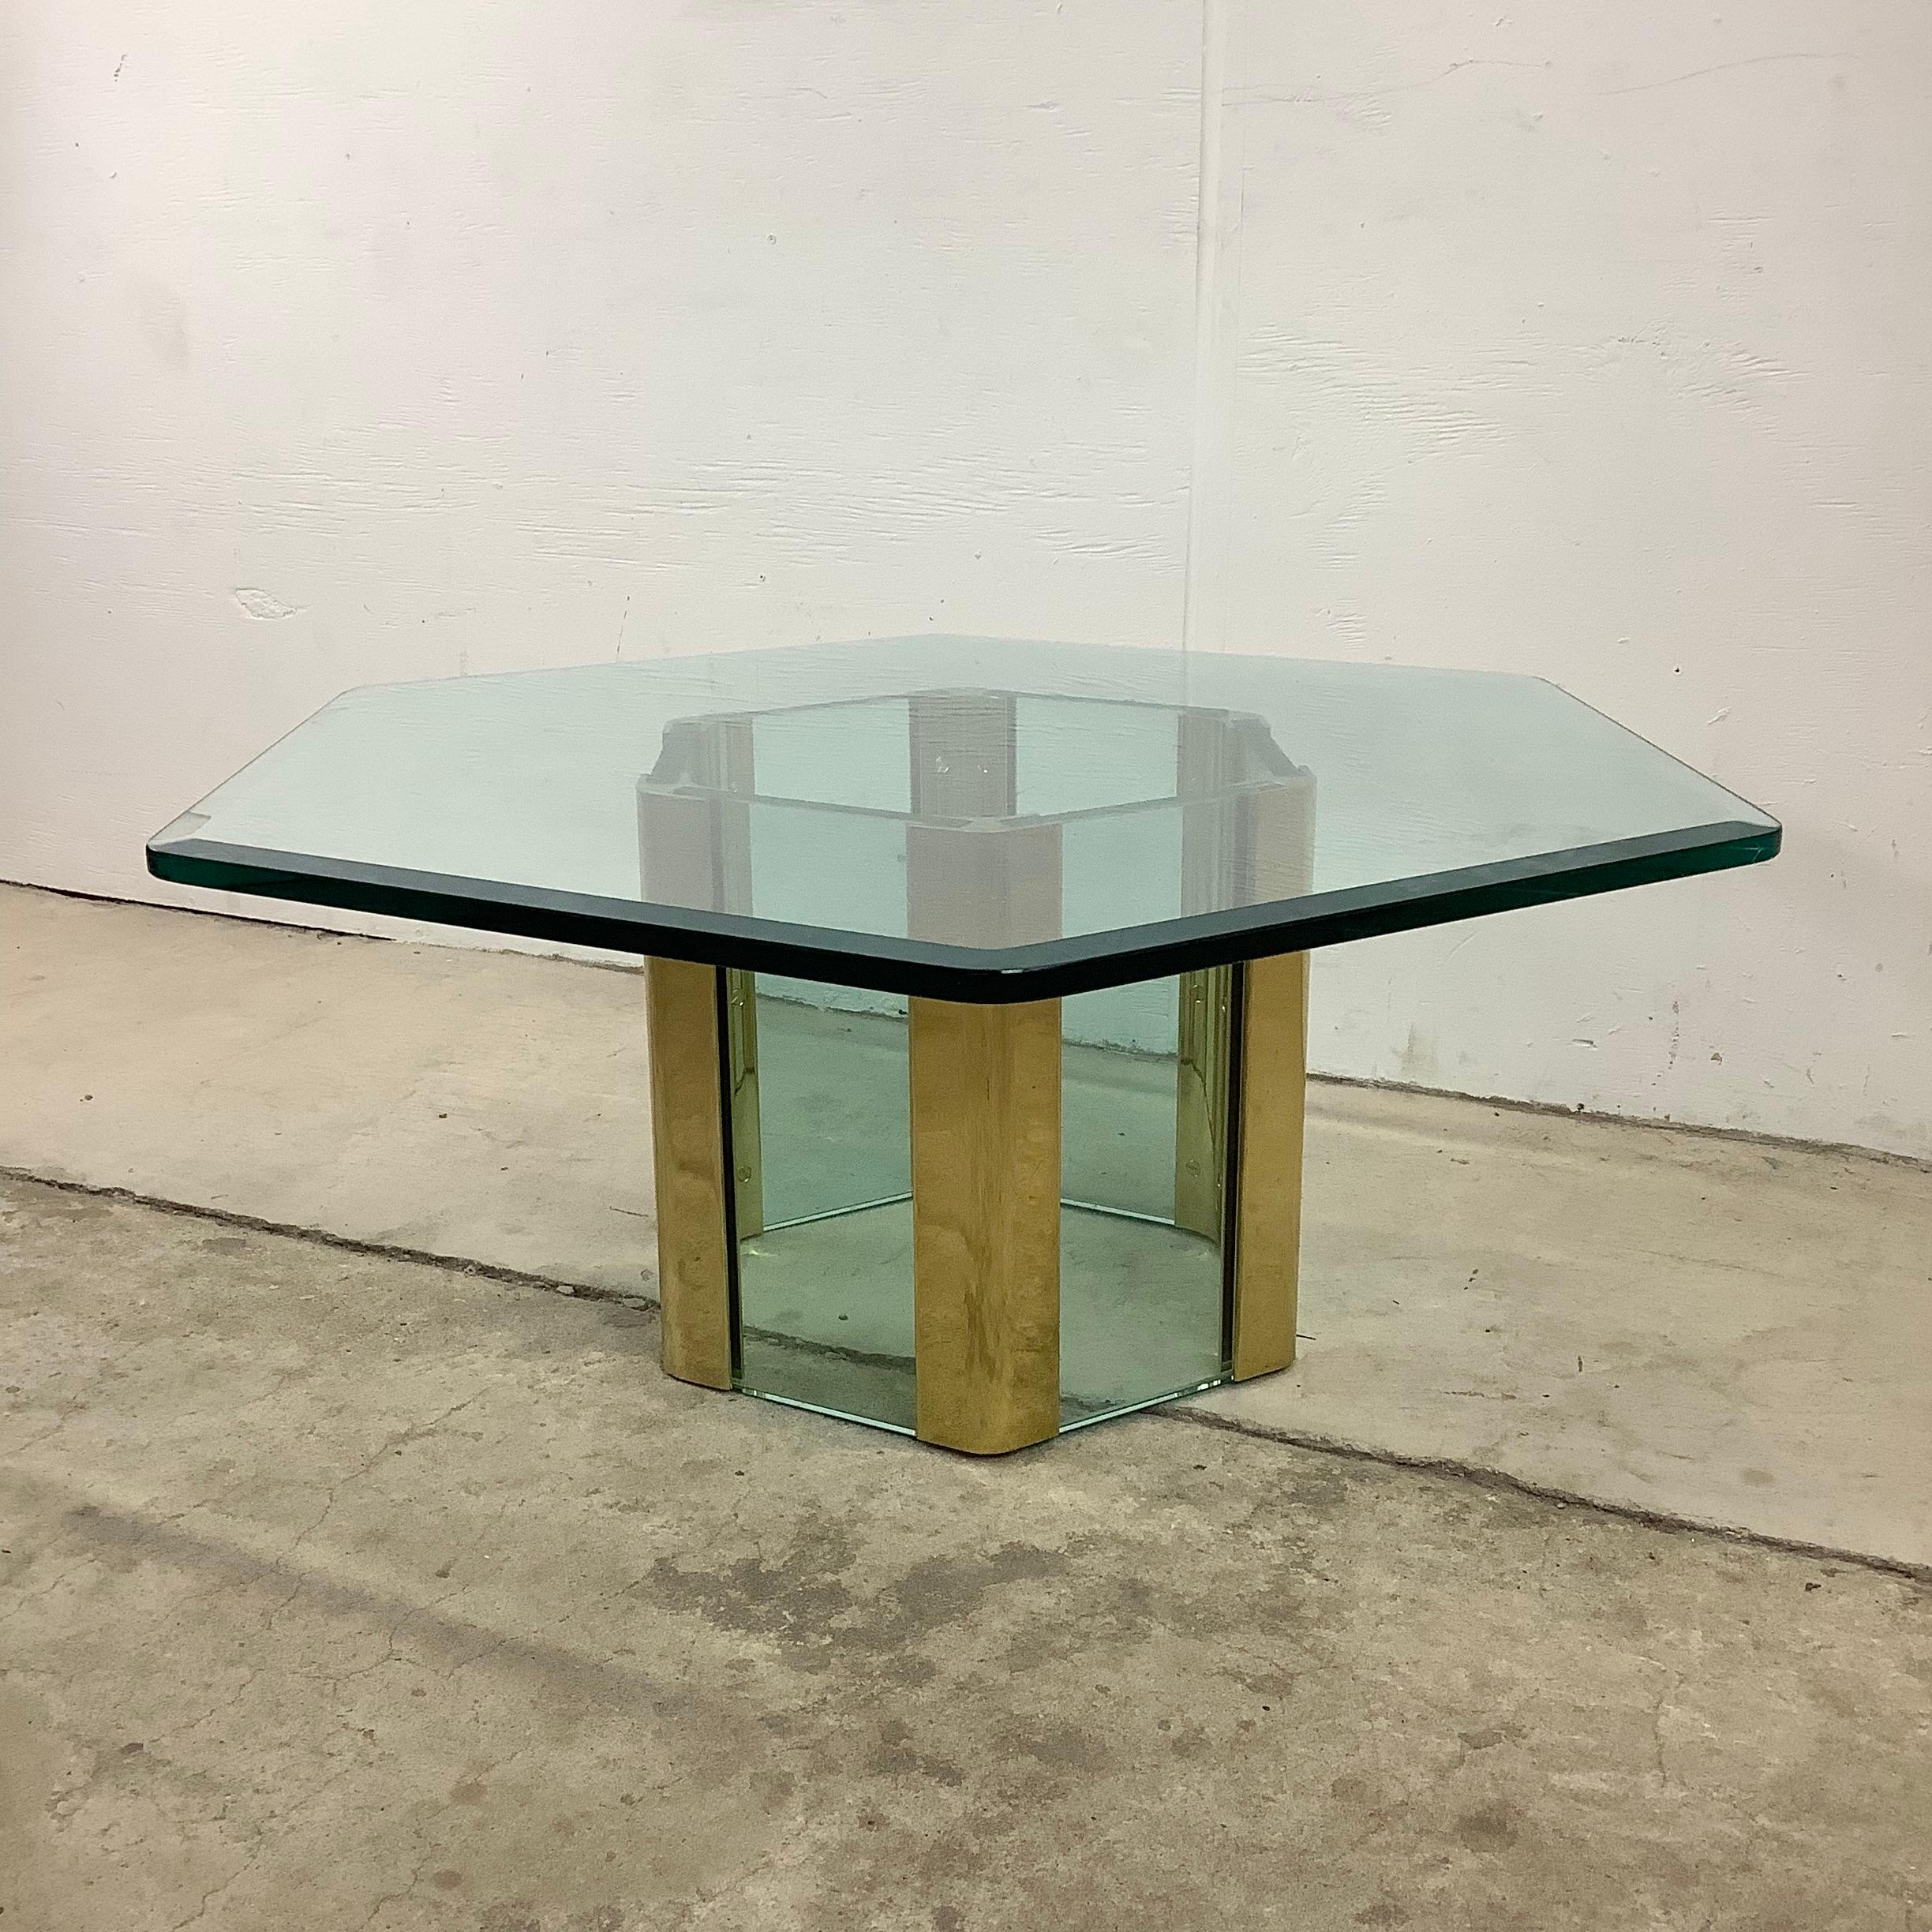 This striking Mid-Century Modern coffee table features a unique mix of brass and glass in a hexagonal design with a thick beveled glass top. An eye catching mixture of clean modern lines and quality vintage craftsmanship make this Leon Rosen for